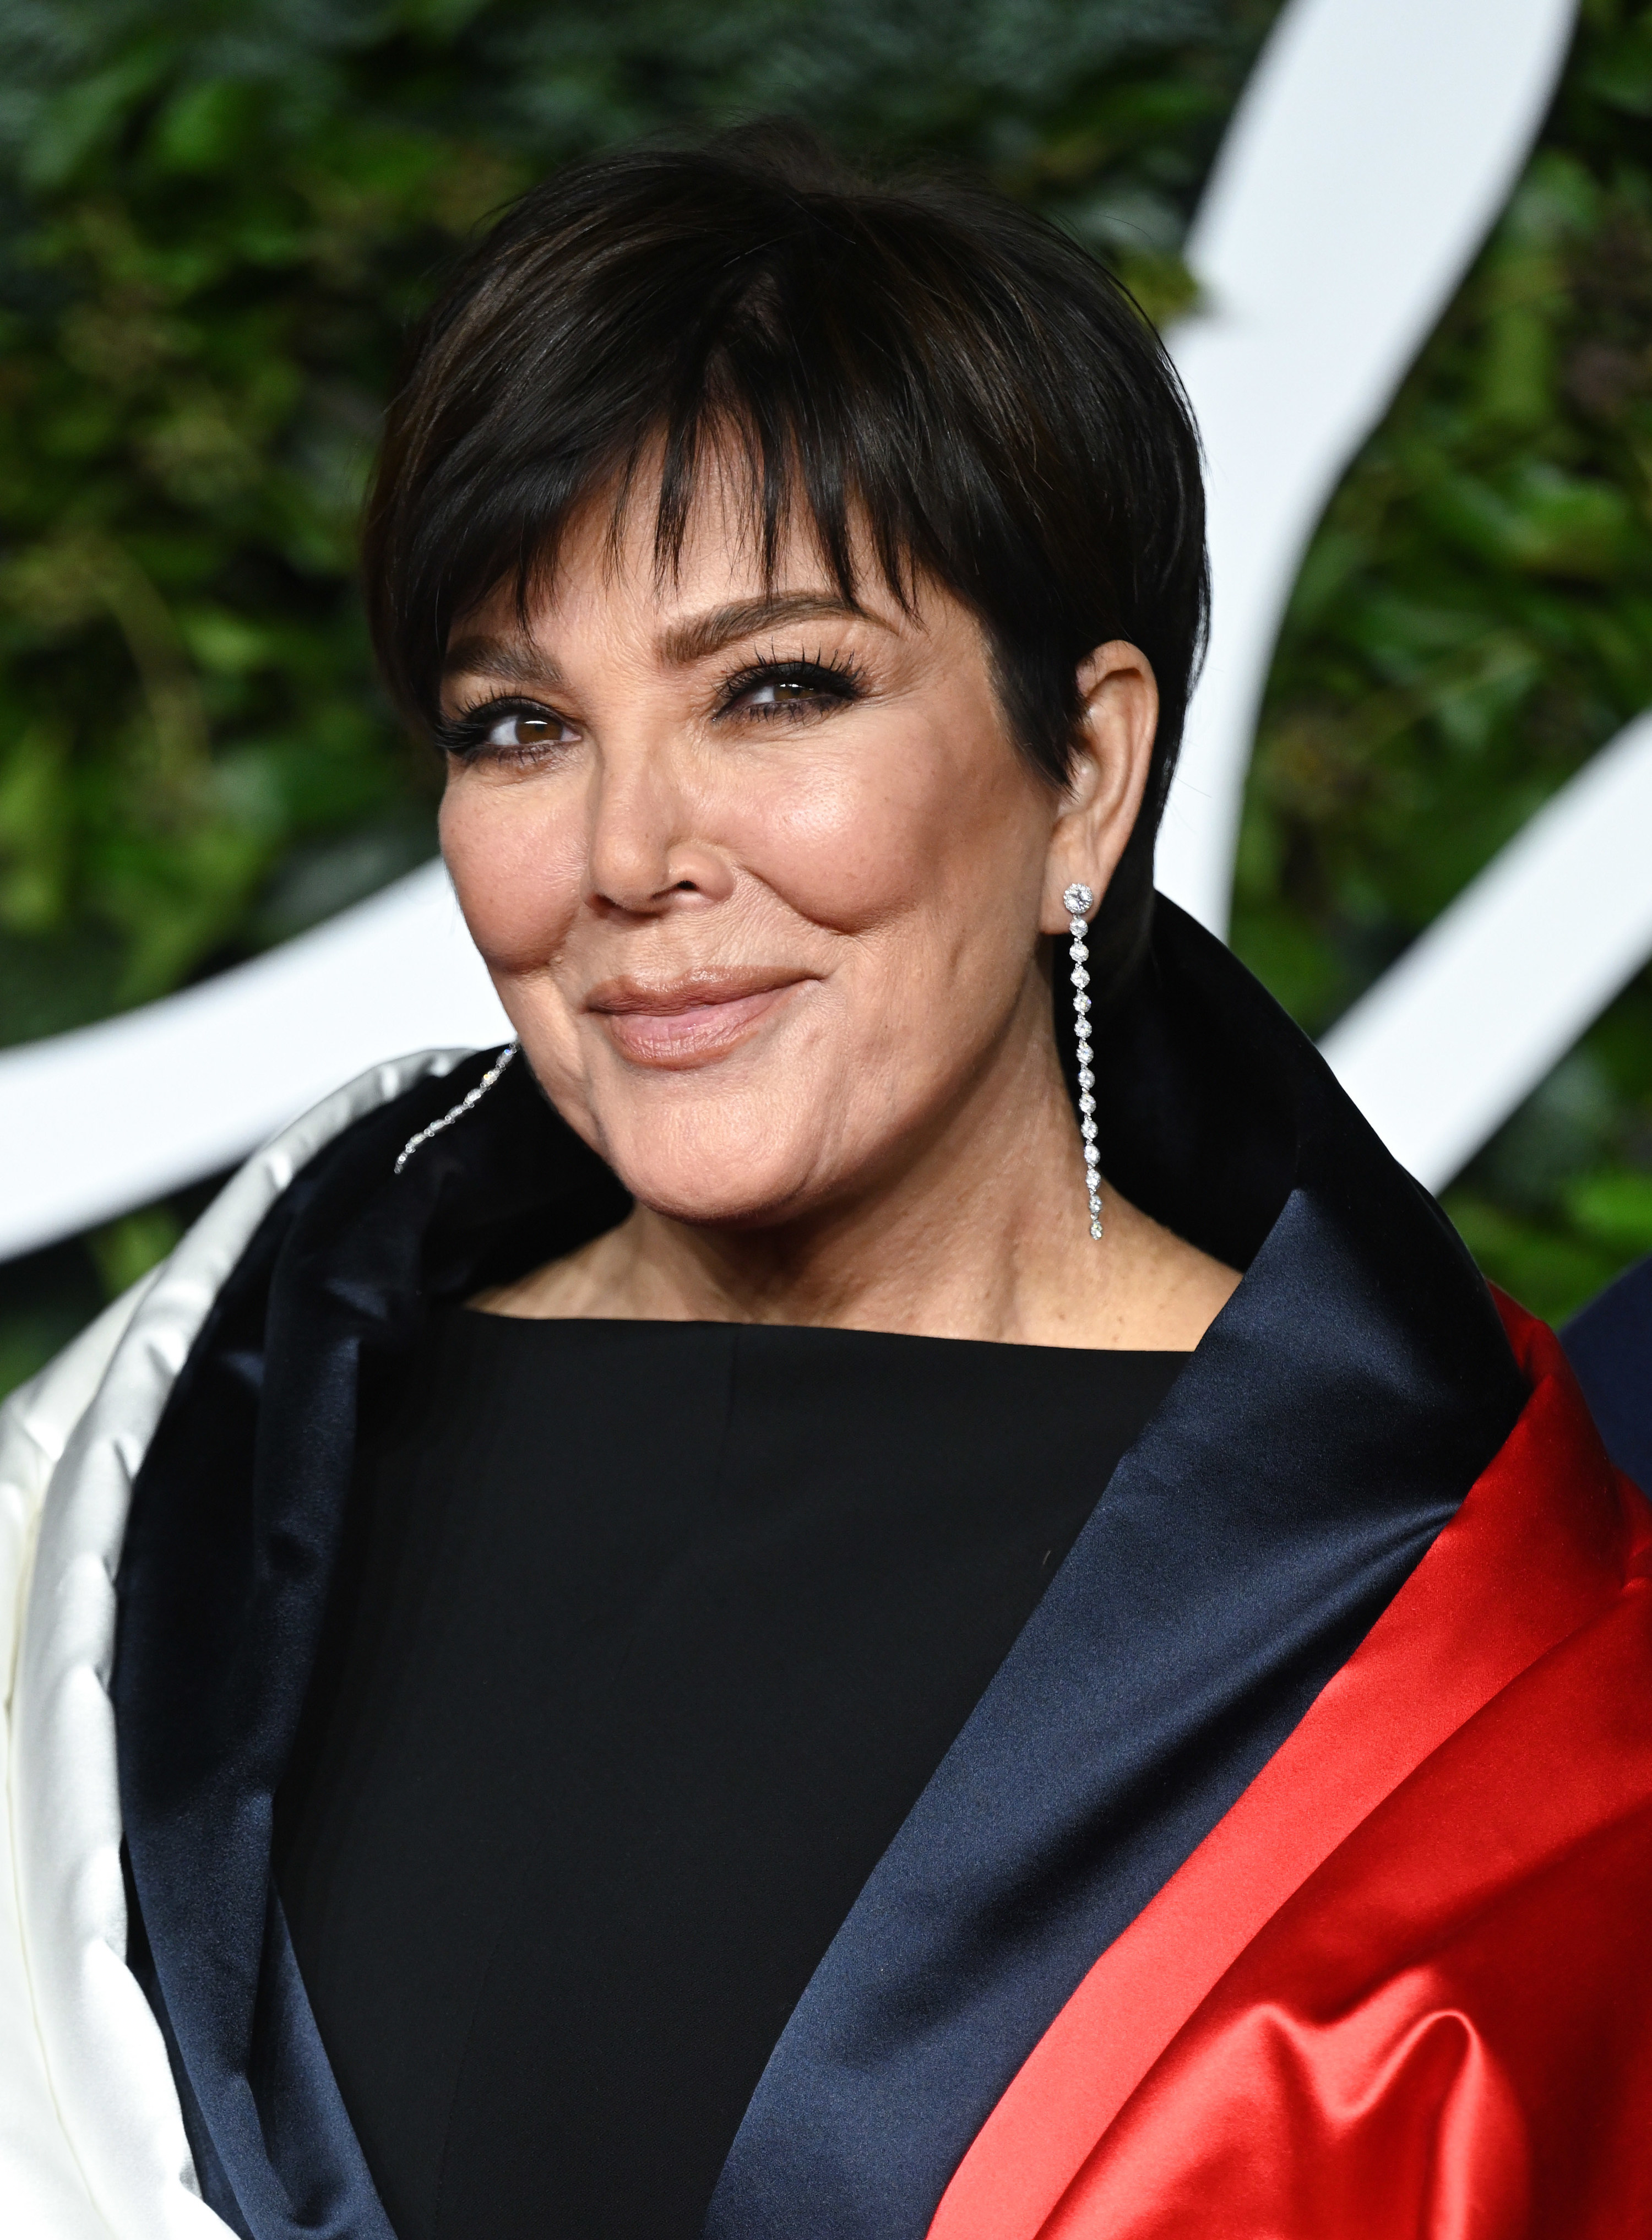 Kris Jenner shows off her $95,000, blue Birkin bag as she jets out of LAX